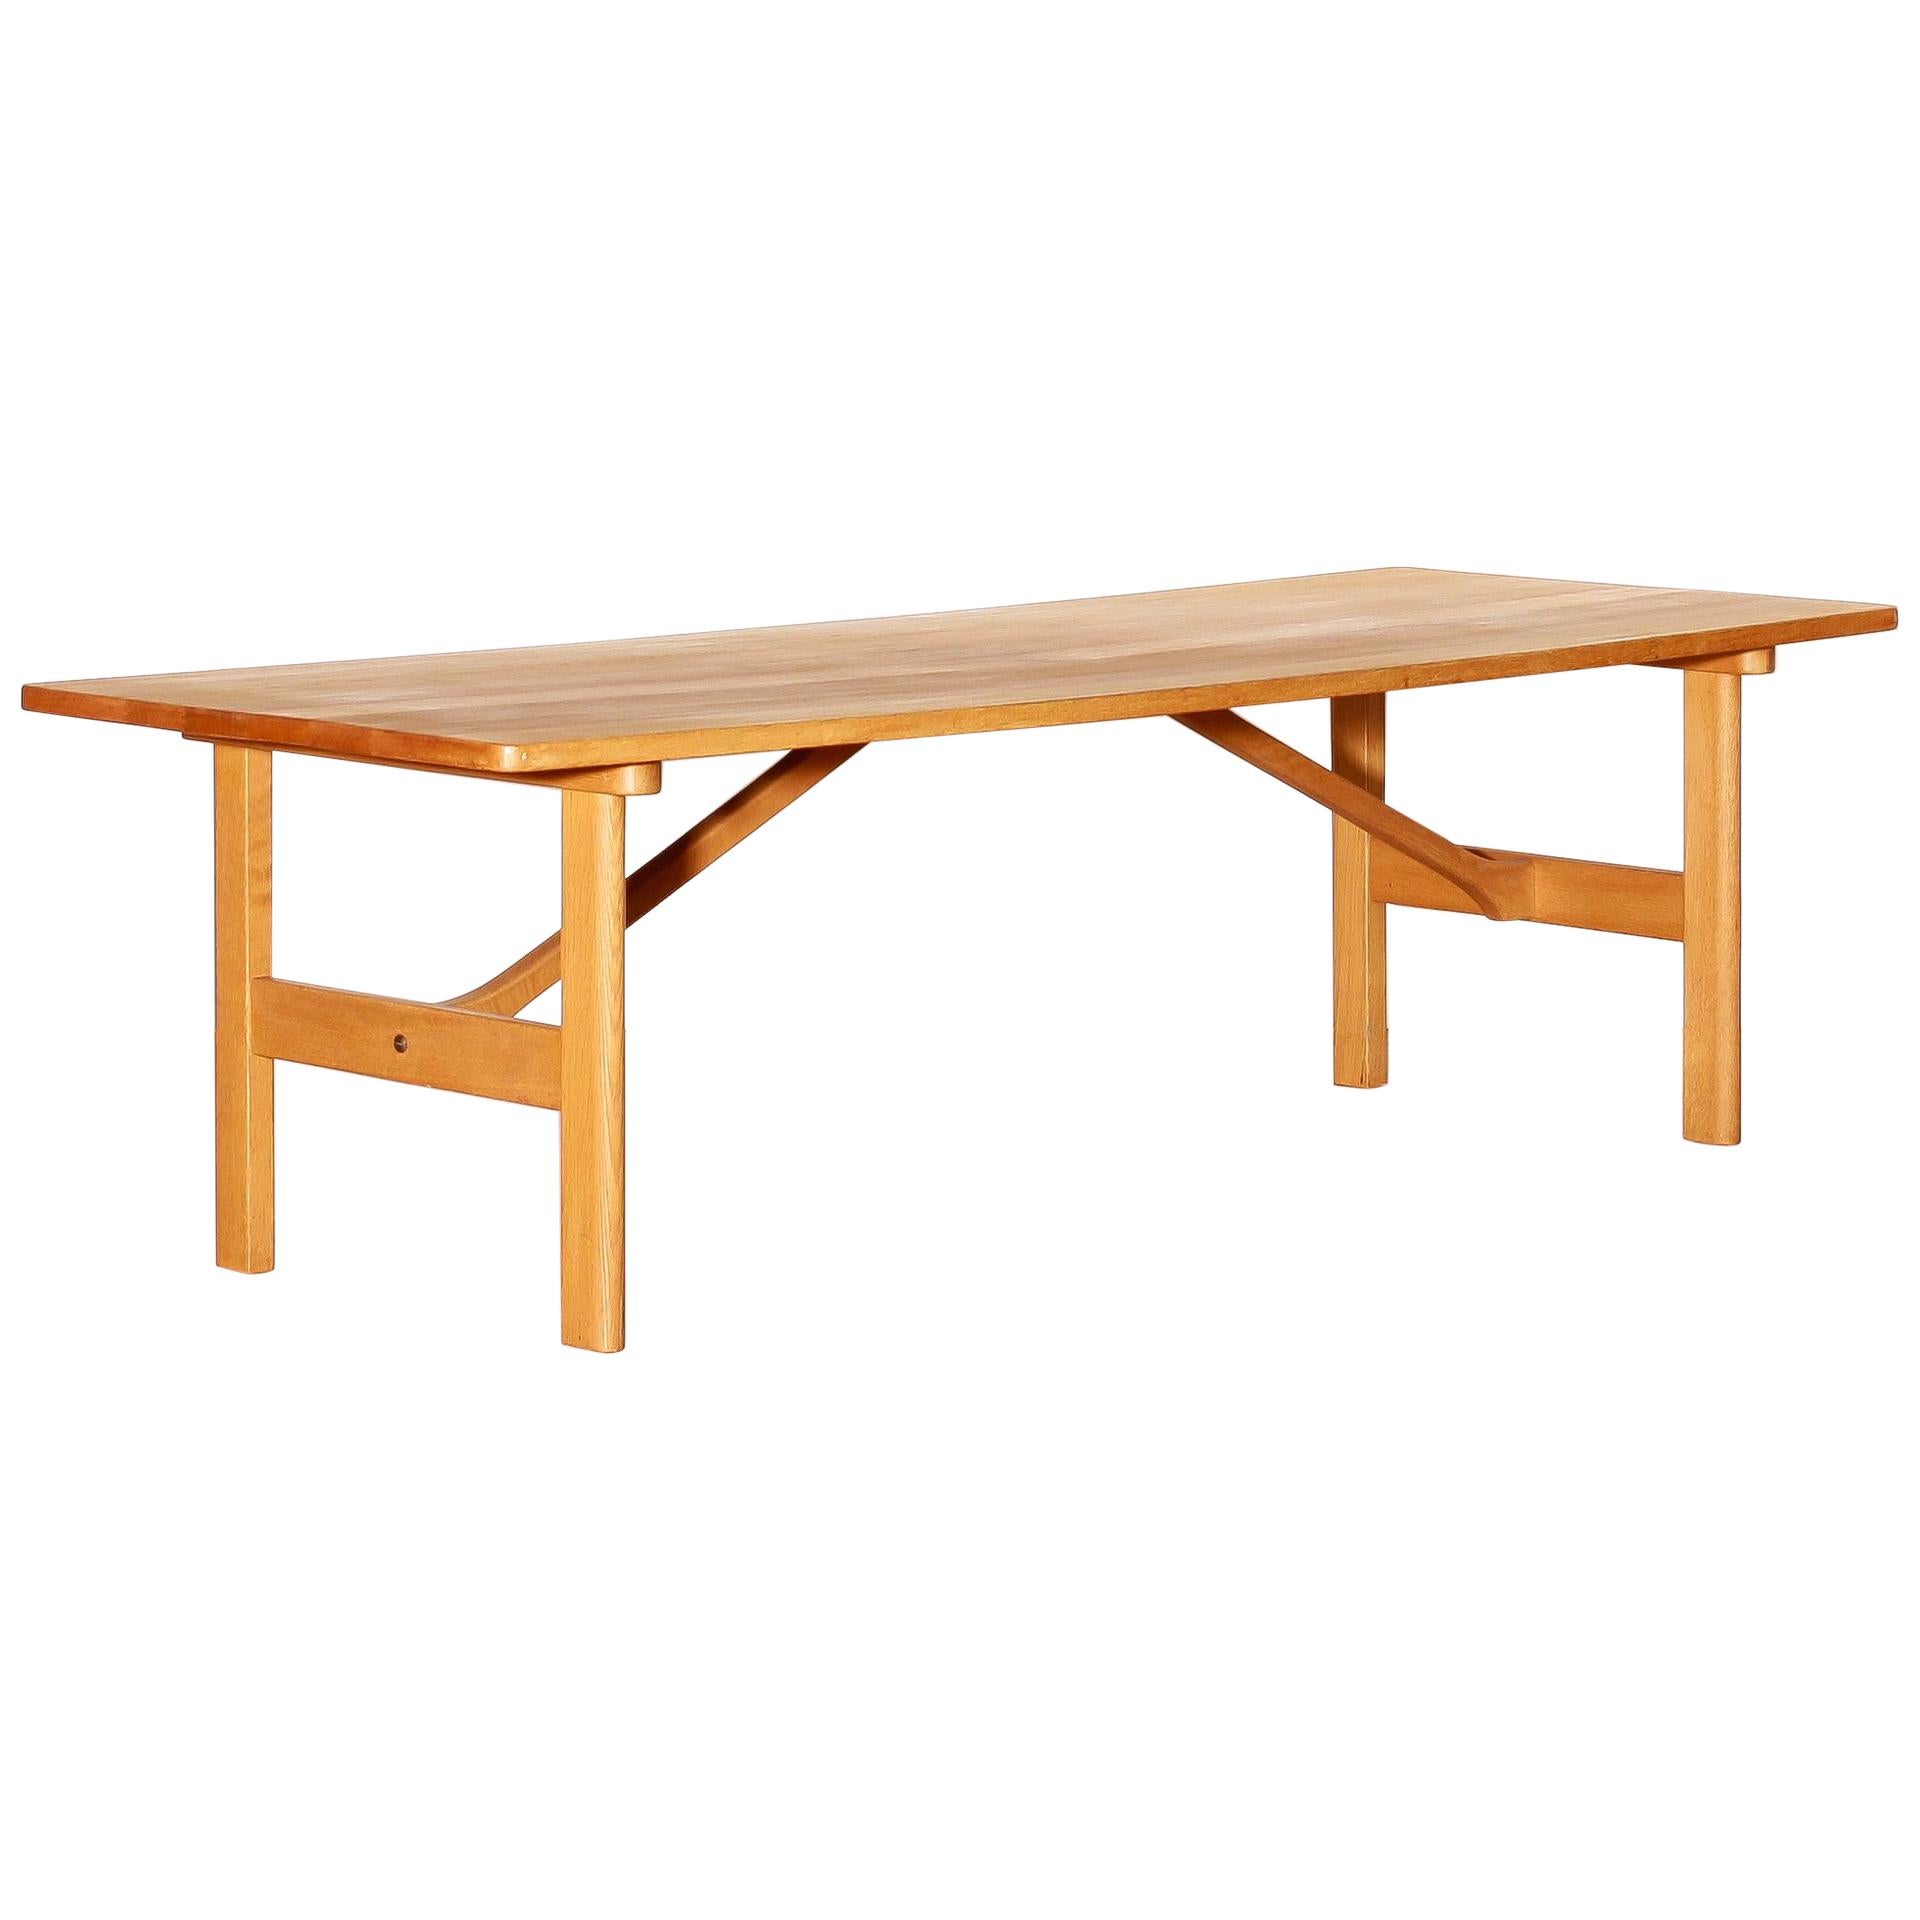 1950s, Oak Coffee Table by Børge Mogensen for Fredericia